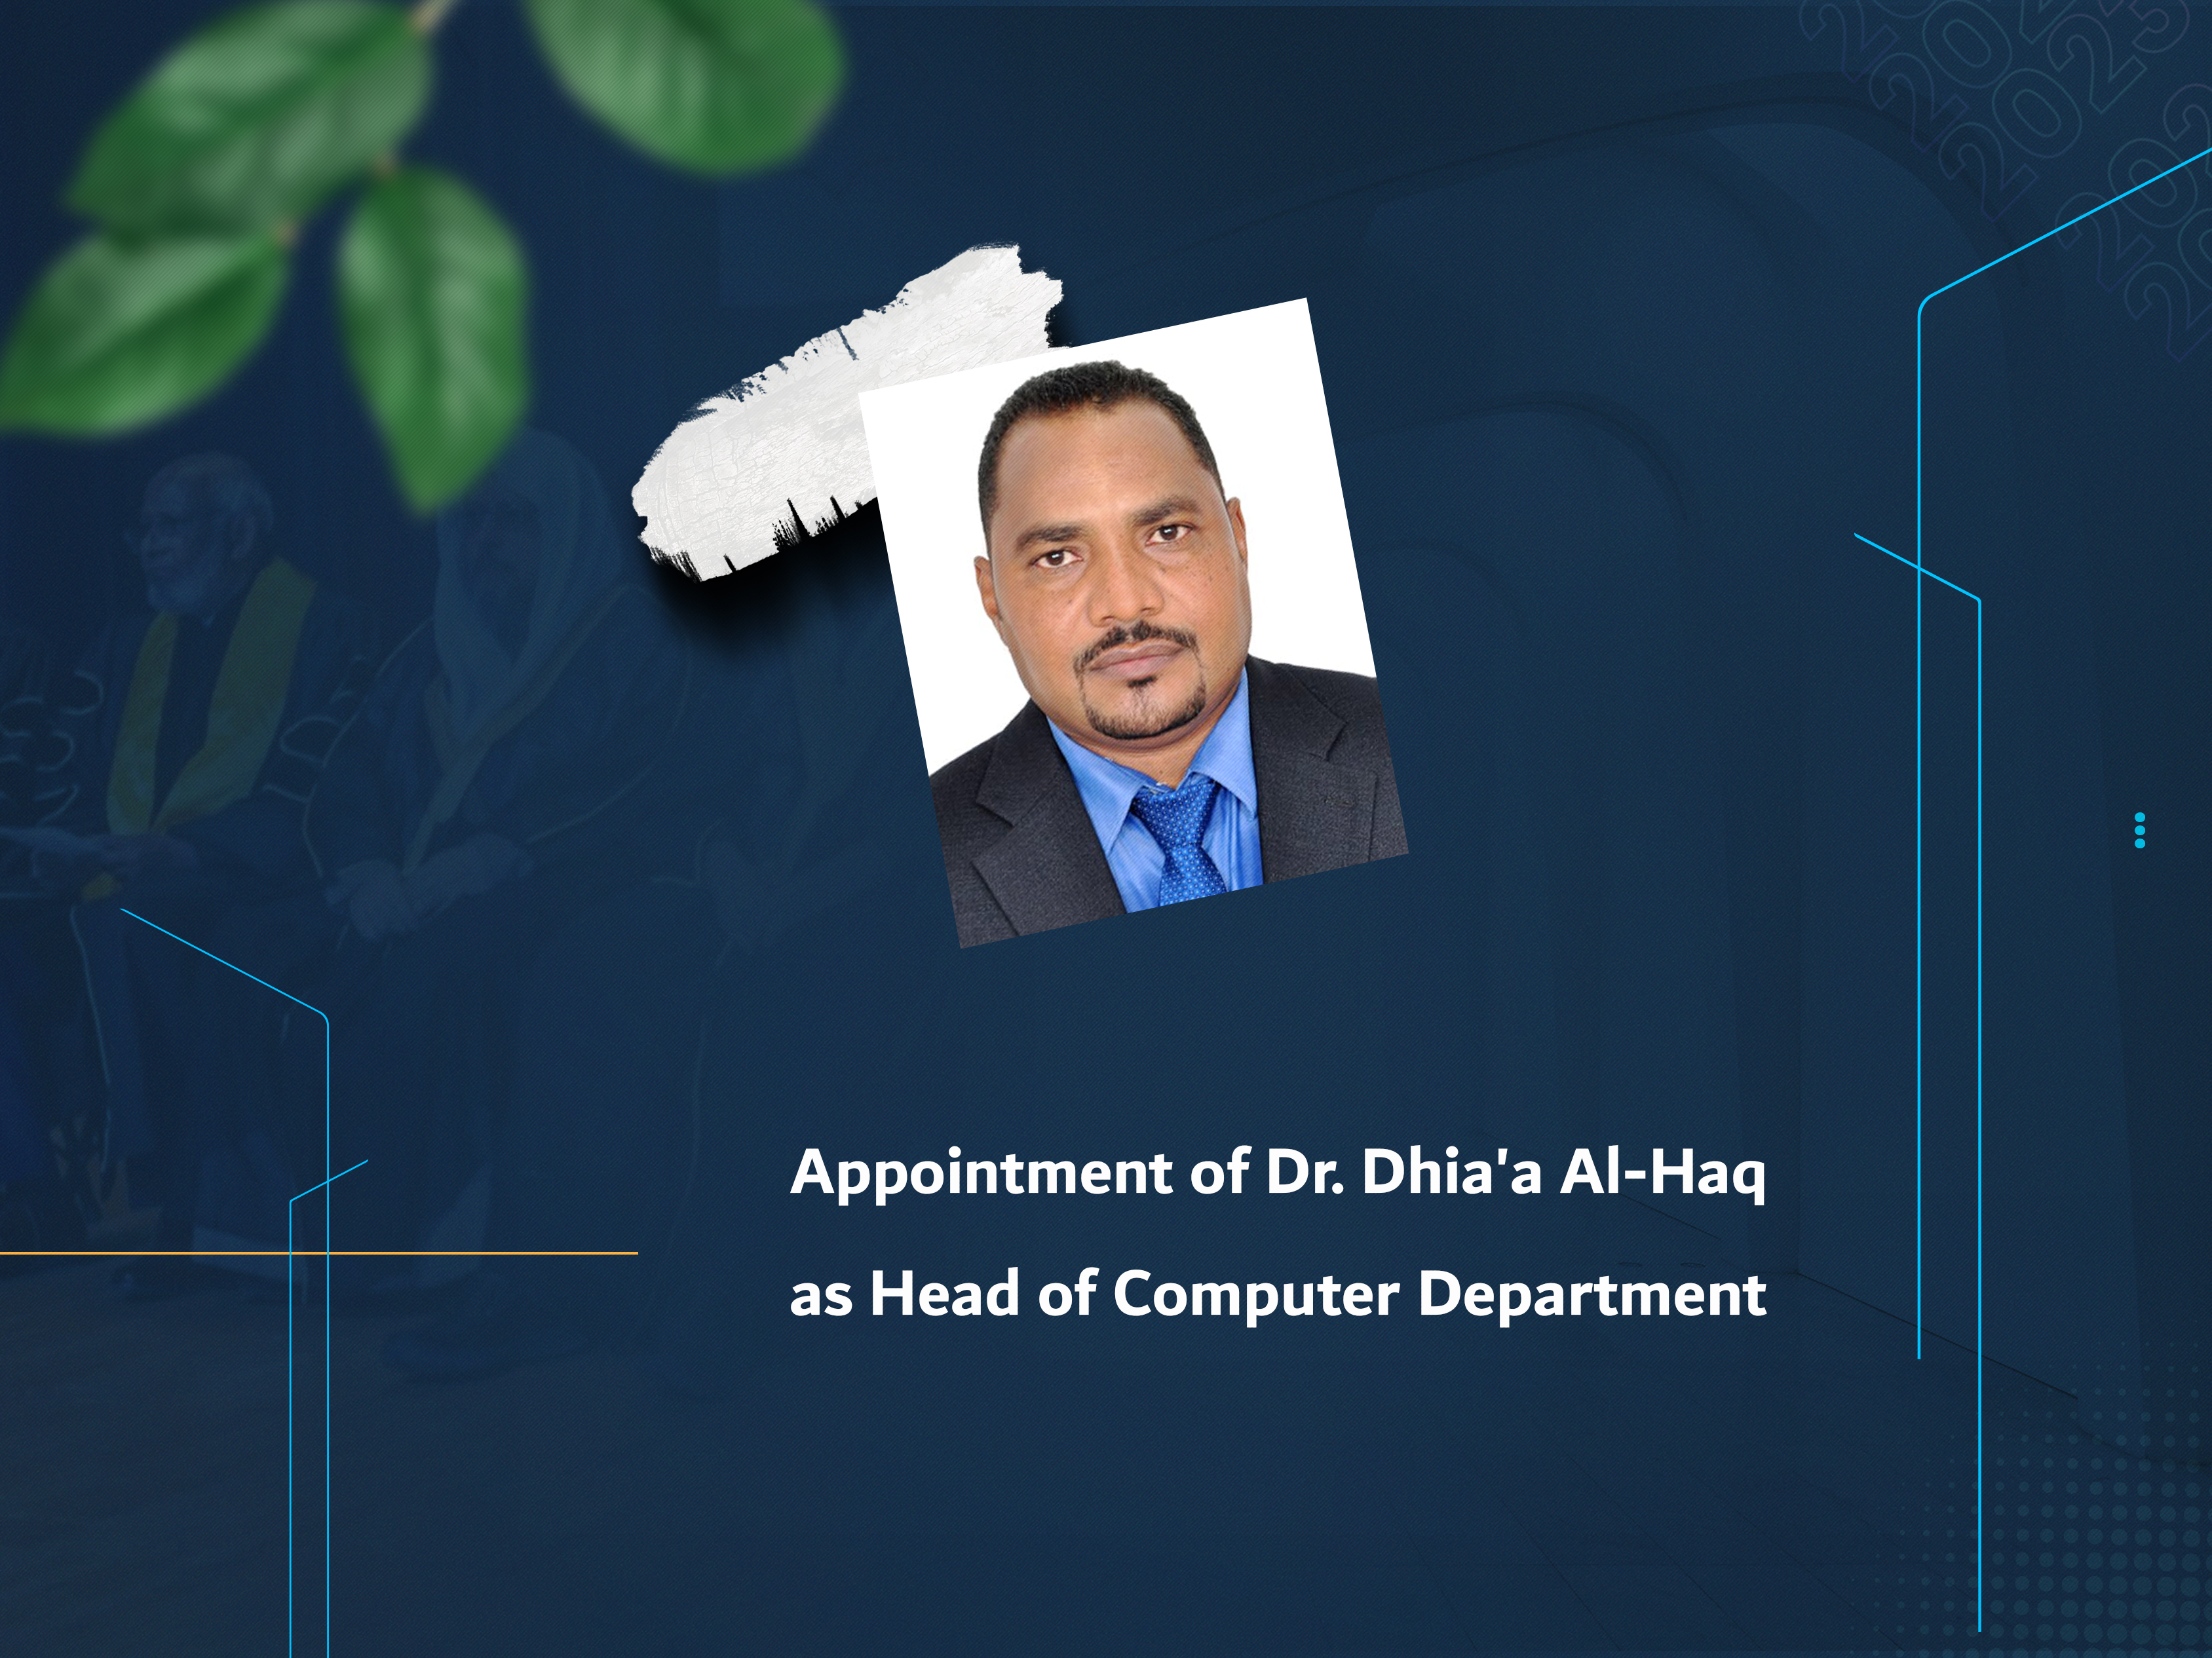 Appointment of Dr. Dhia'a Al-Haq as Head of Computer Department